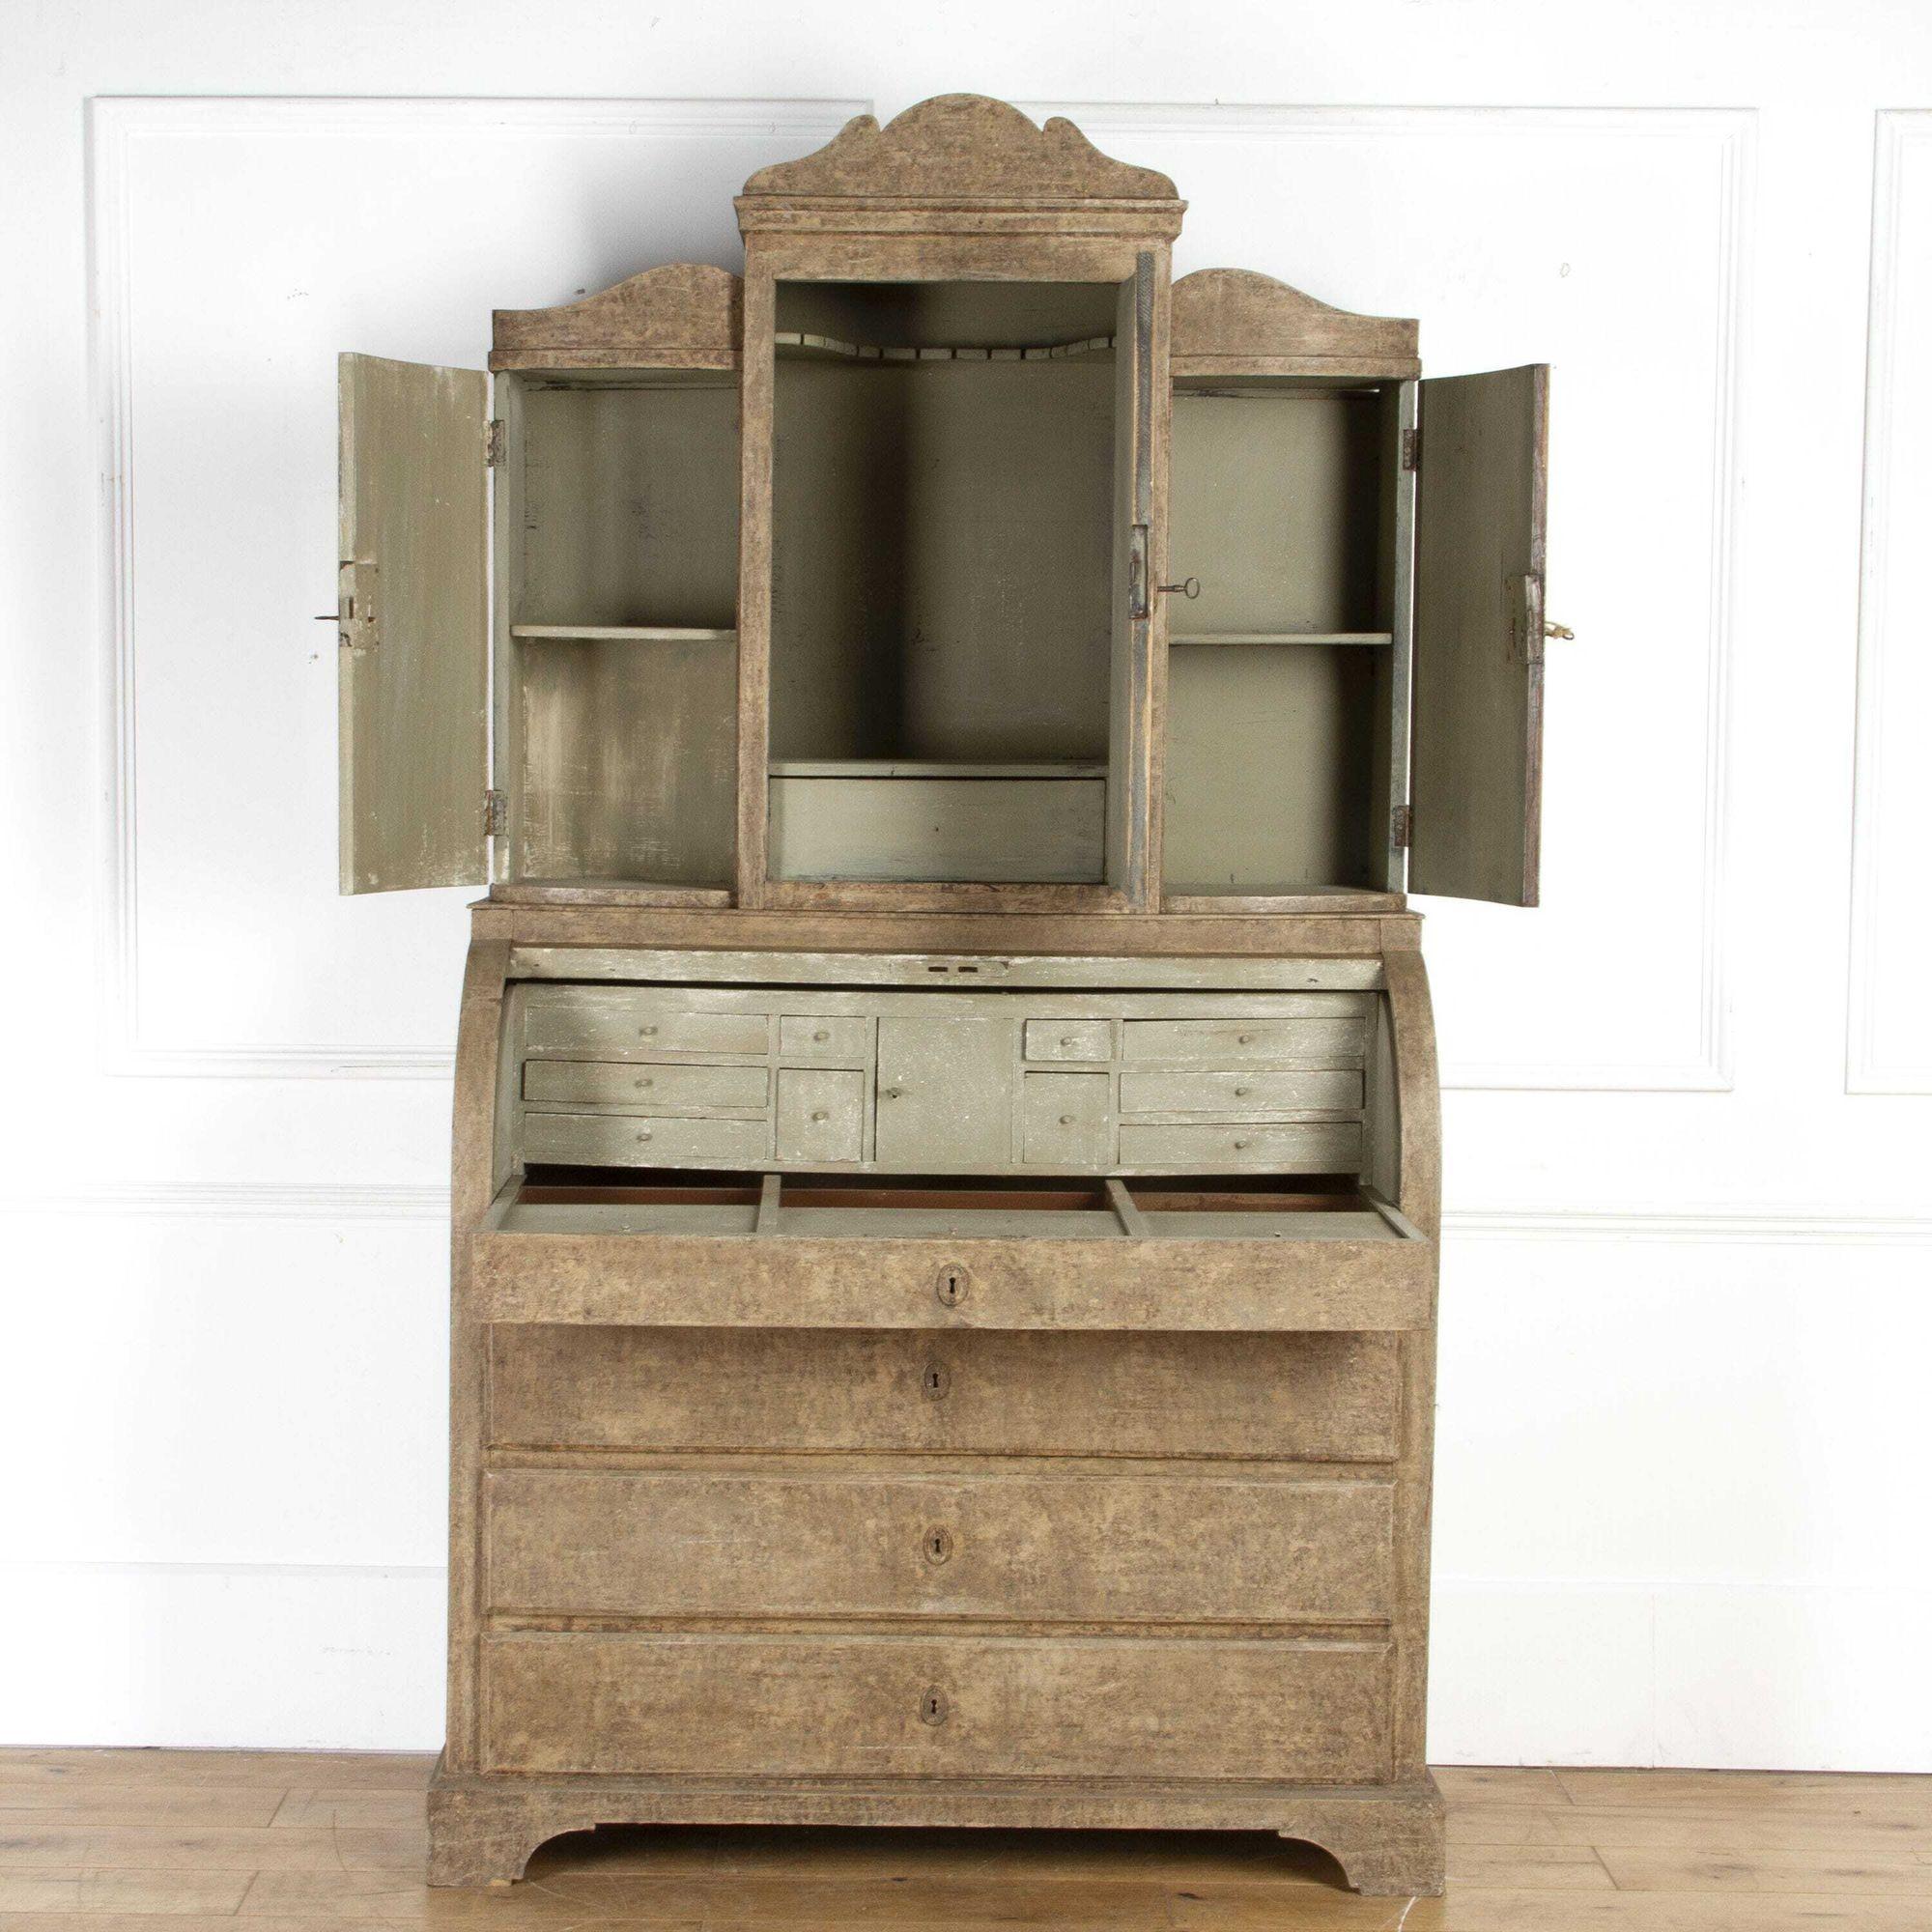 A lovely painted roll top desk with cupboards to the top and a bow front central door.
Under the roll top is a pull out section with sliding panels for storage.
It has sprung locks with keys.
A rare piece to adorn your home.